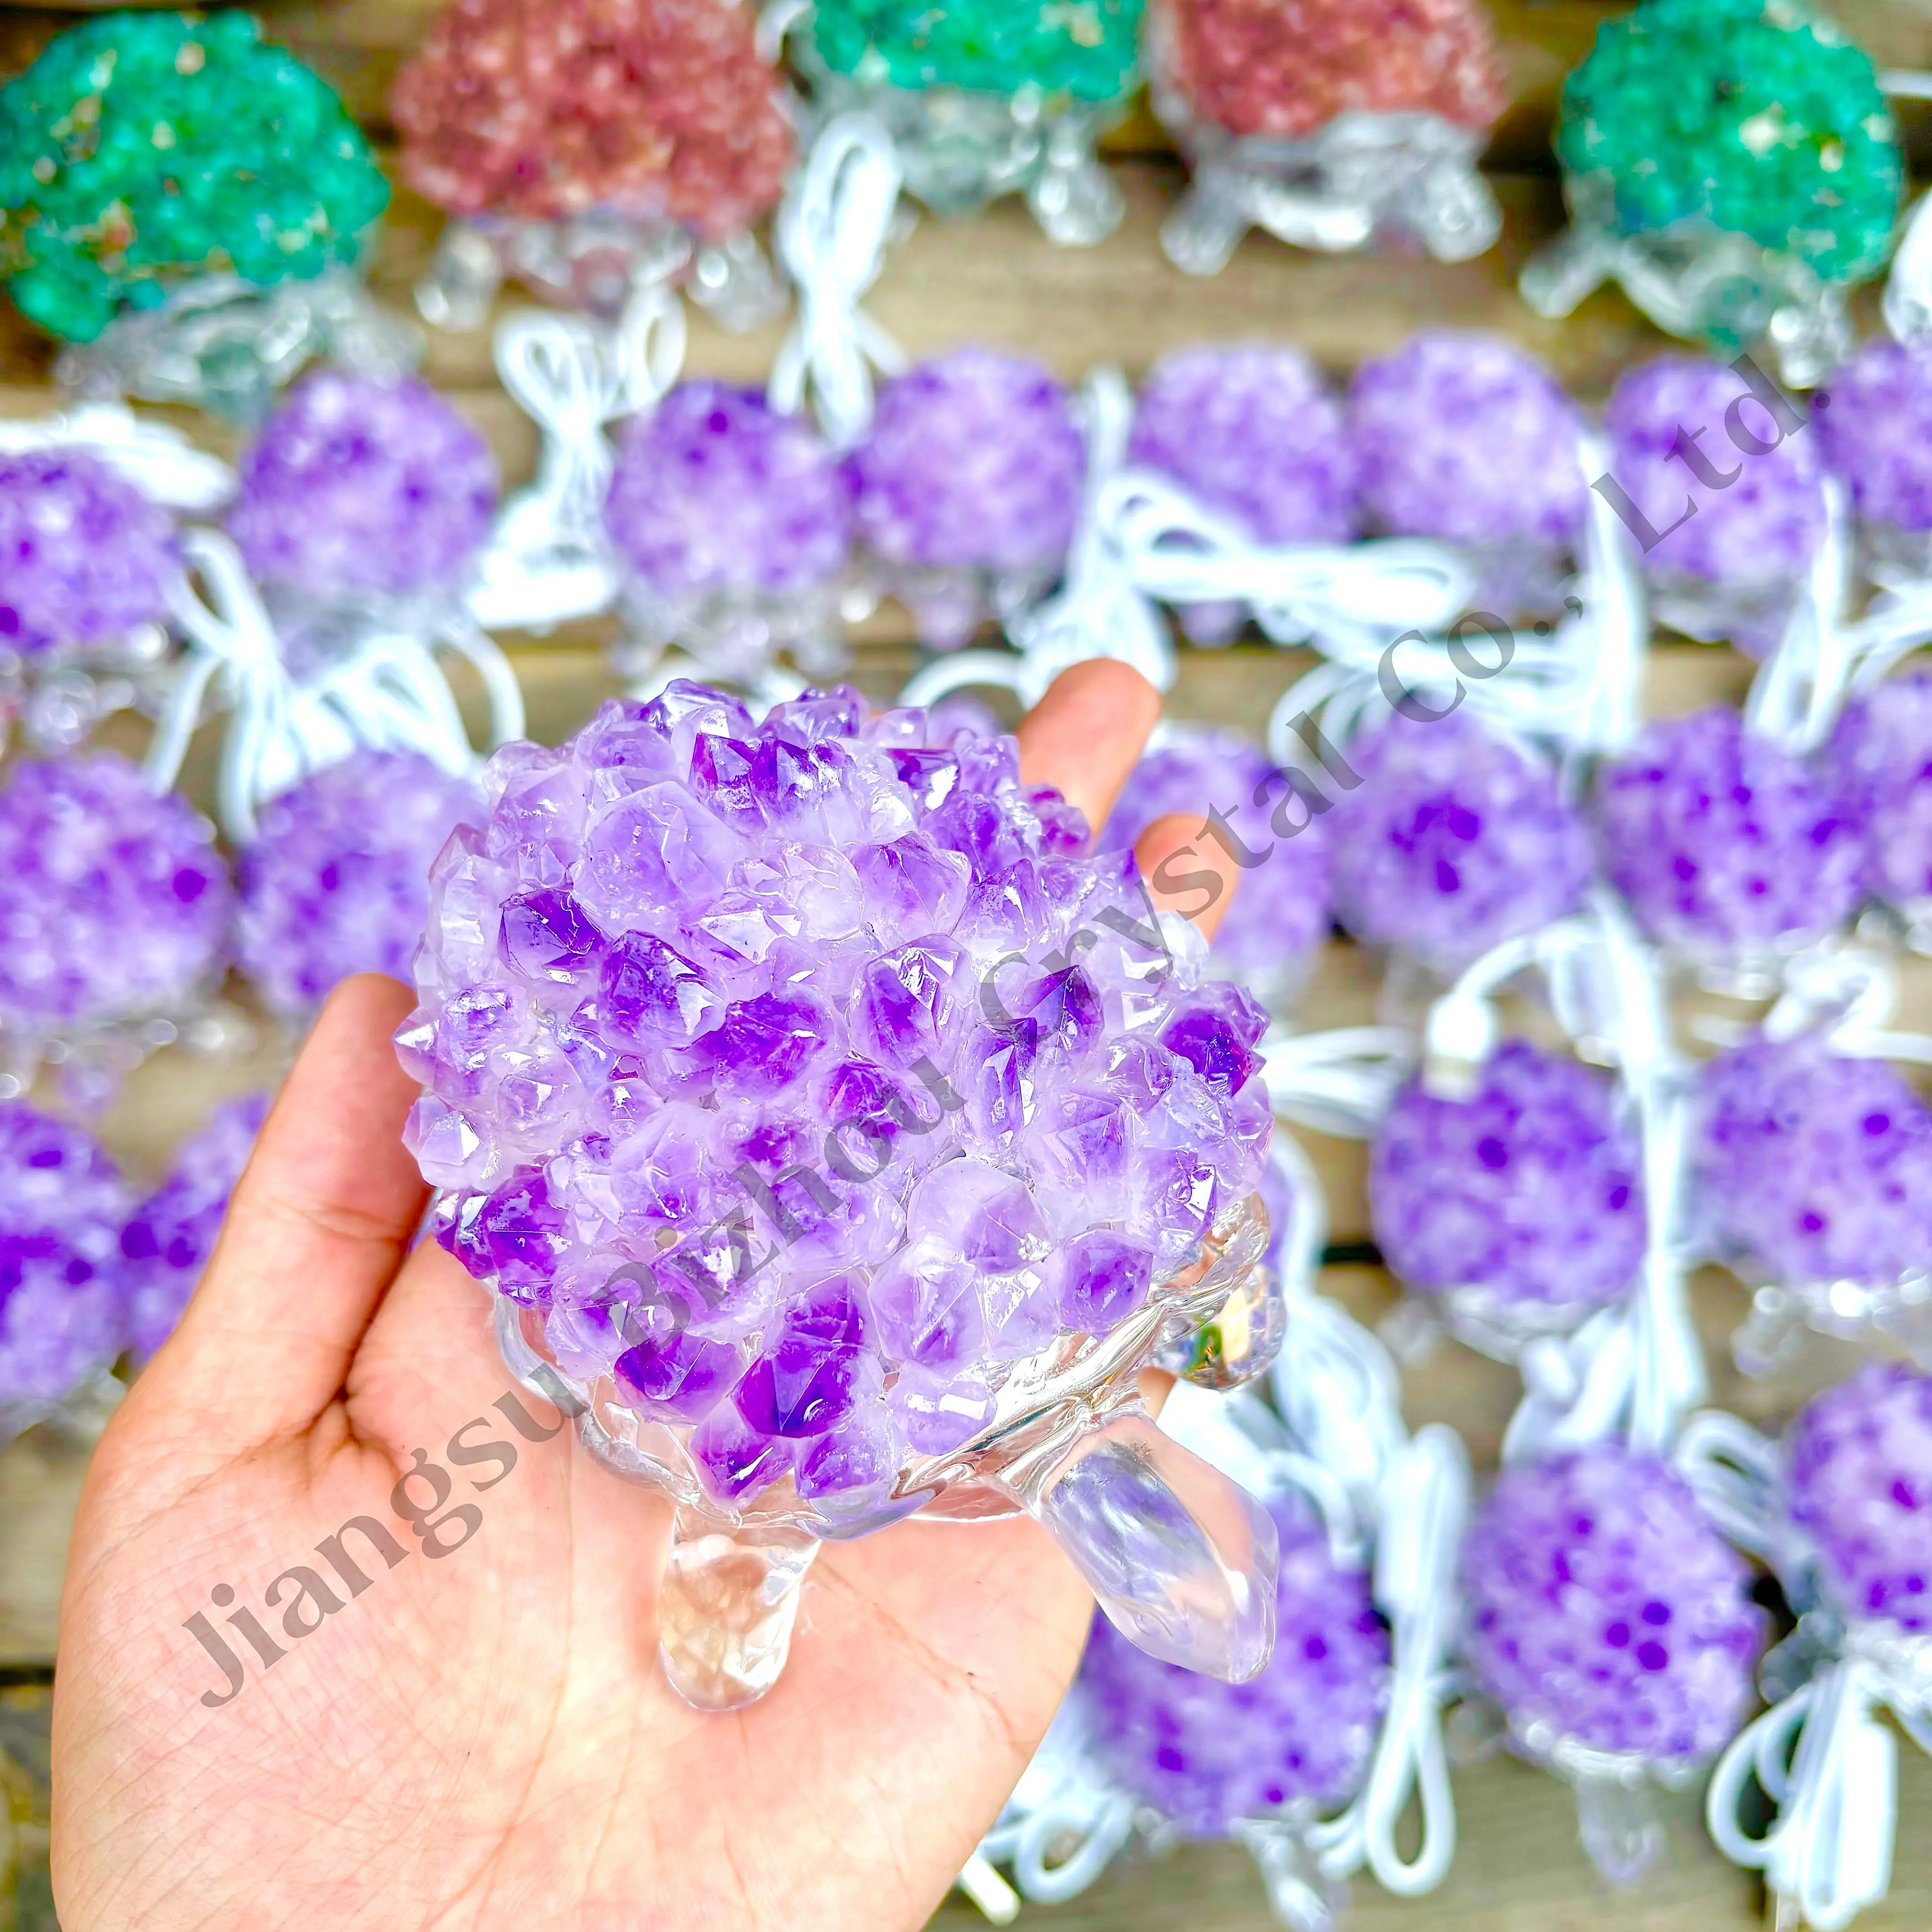 Factory Price Amethyst Crystal Raw Stone Crystal Chips Lamp Rough Quartz Crystal Turtle Style Nightlight For Fengshui Decor